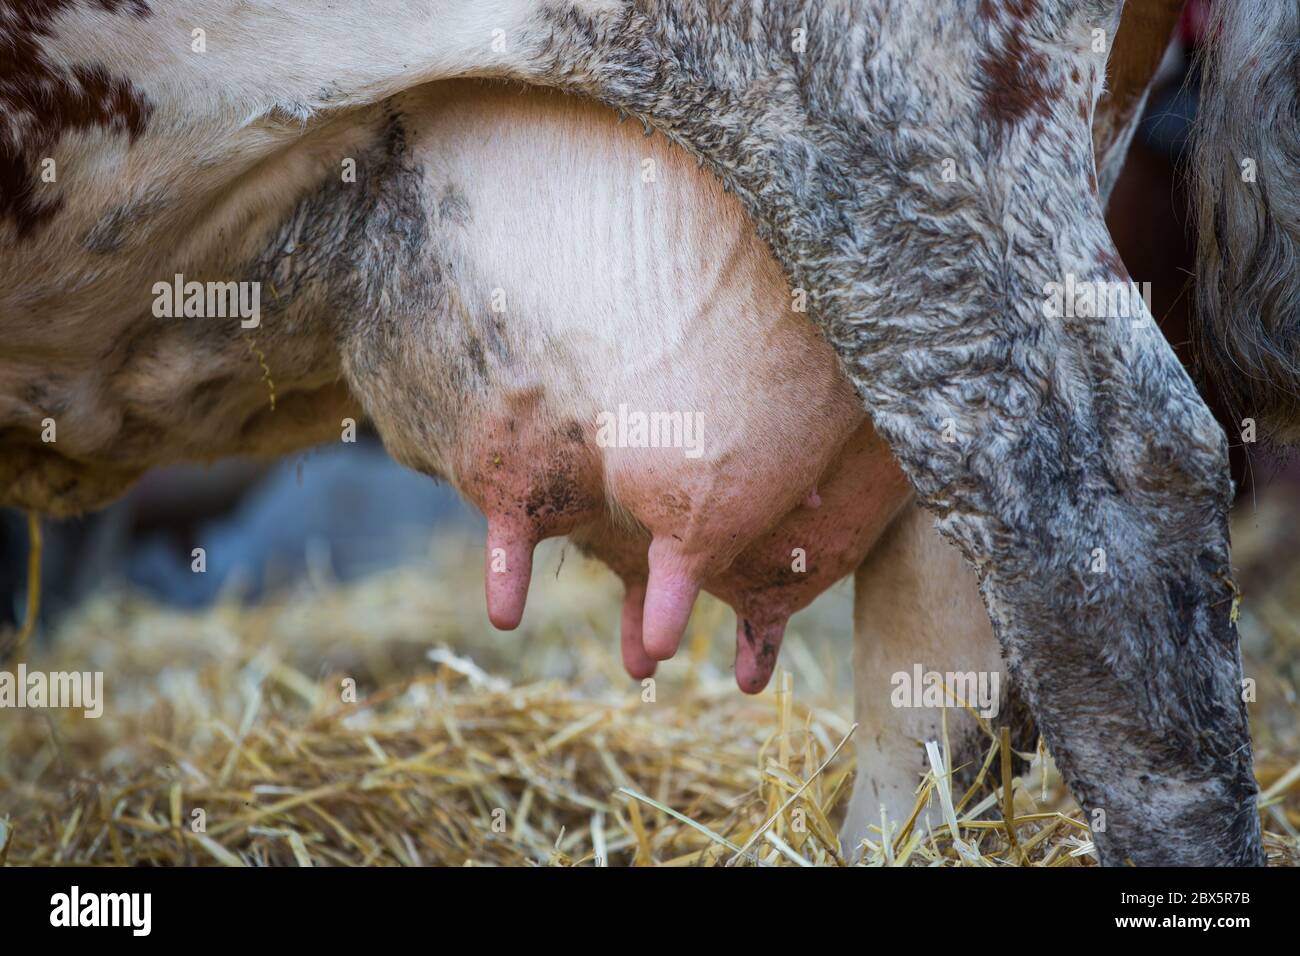 Cow udder full of milk, ready for milking, agriculture concept Stock Photo